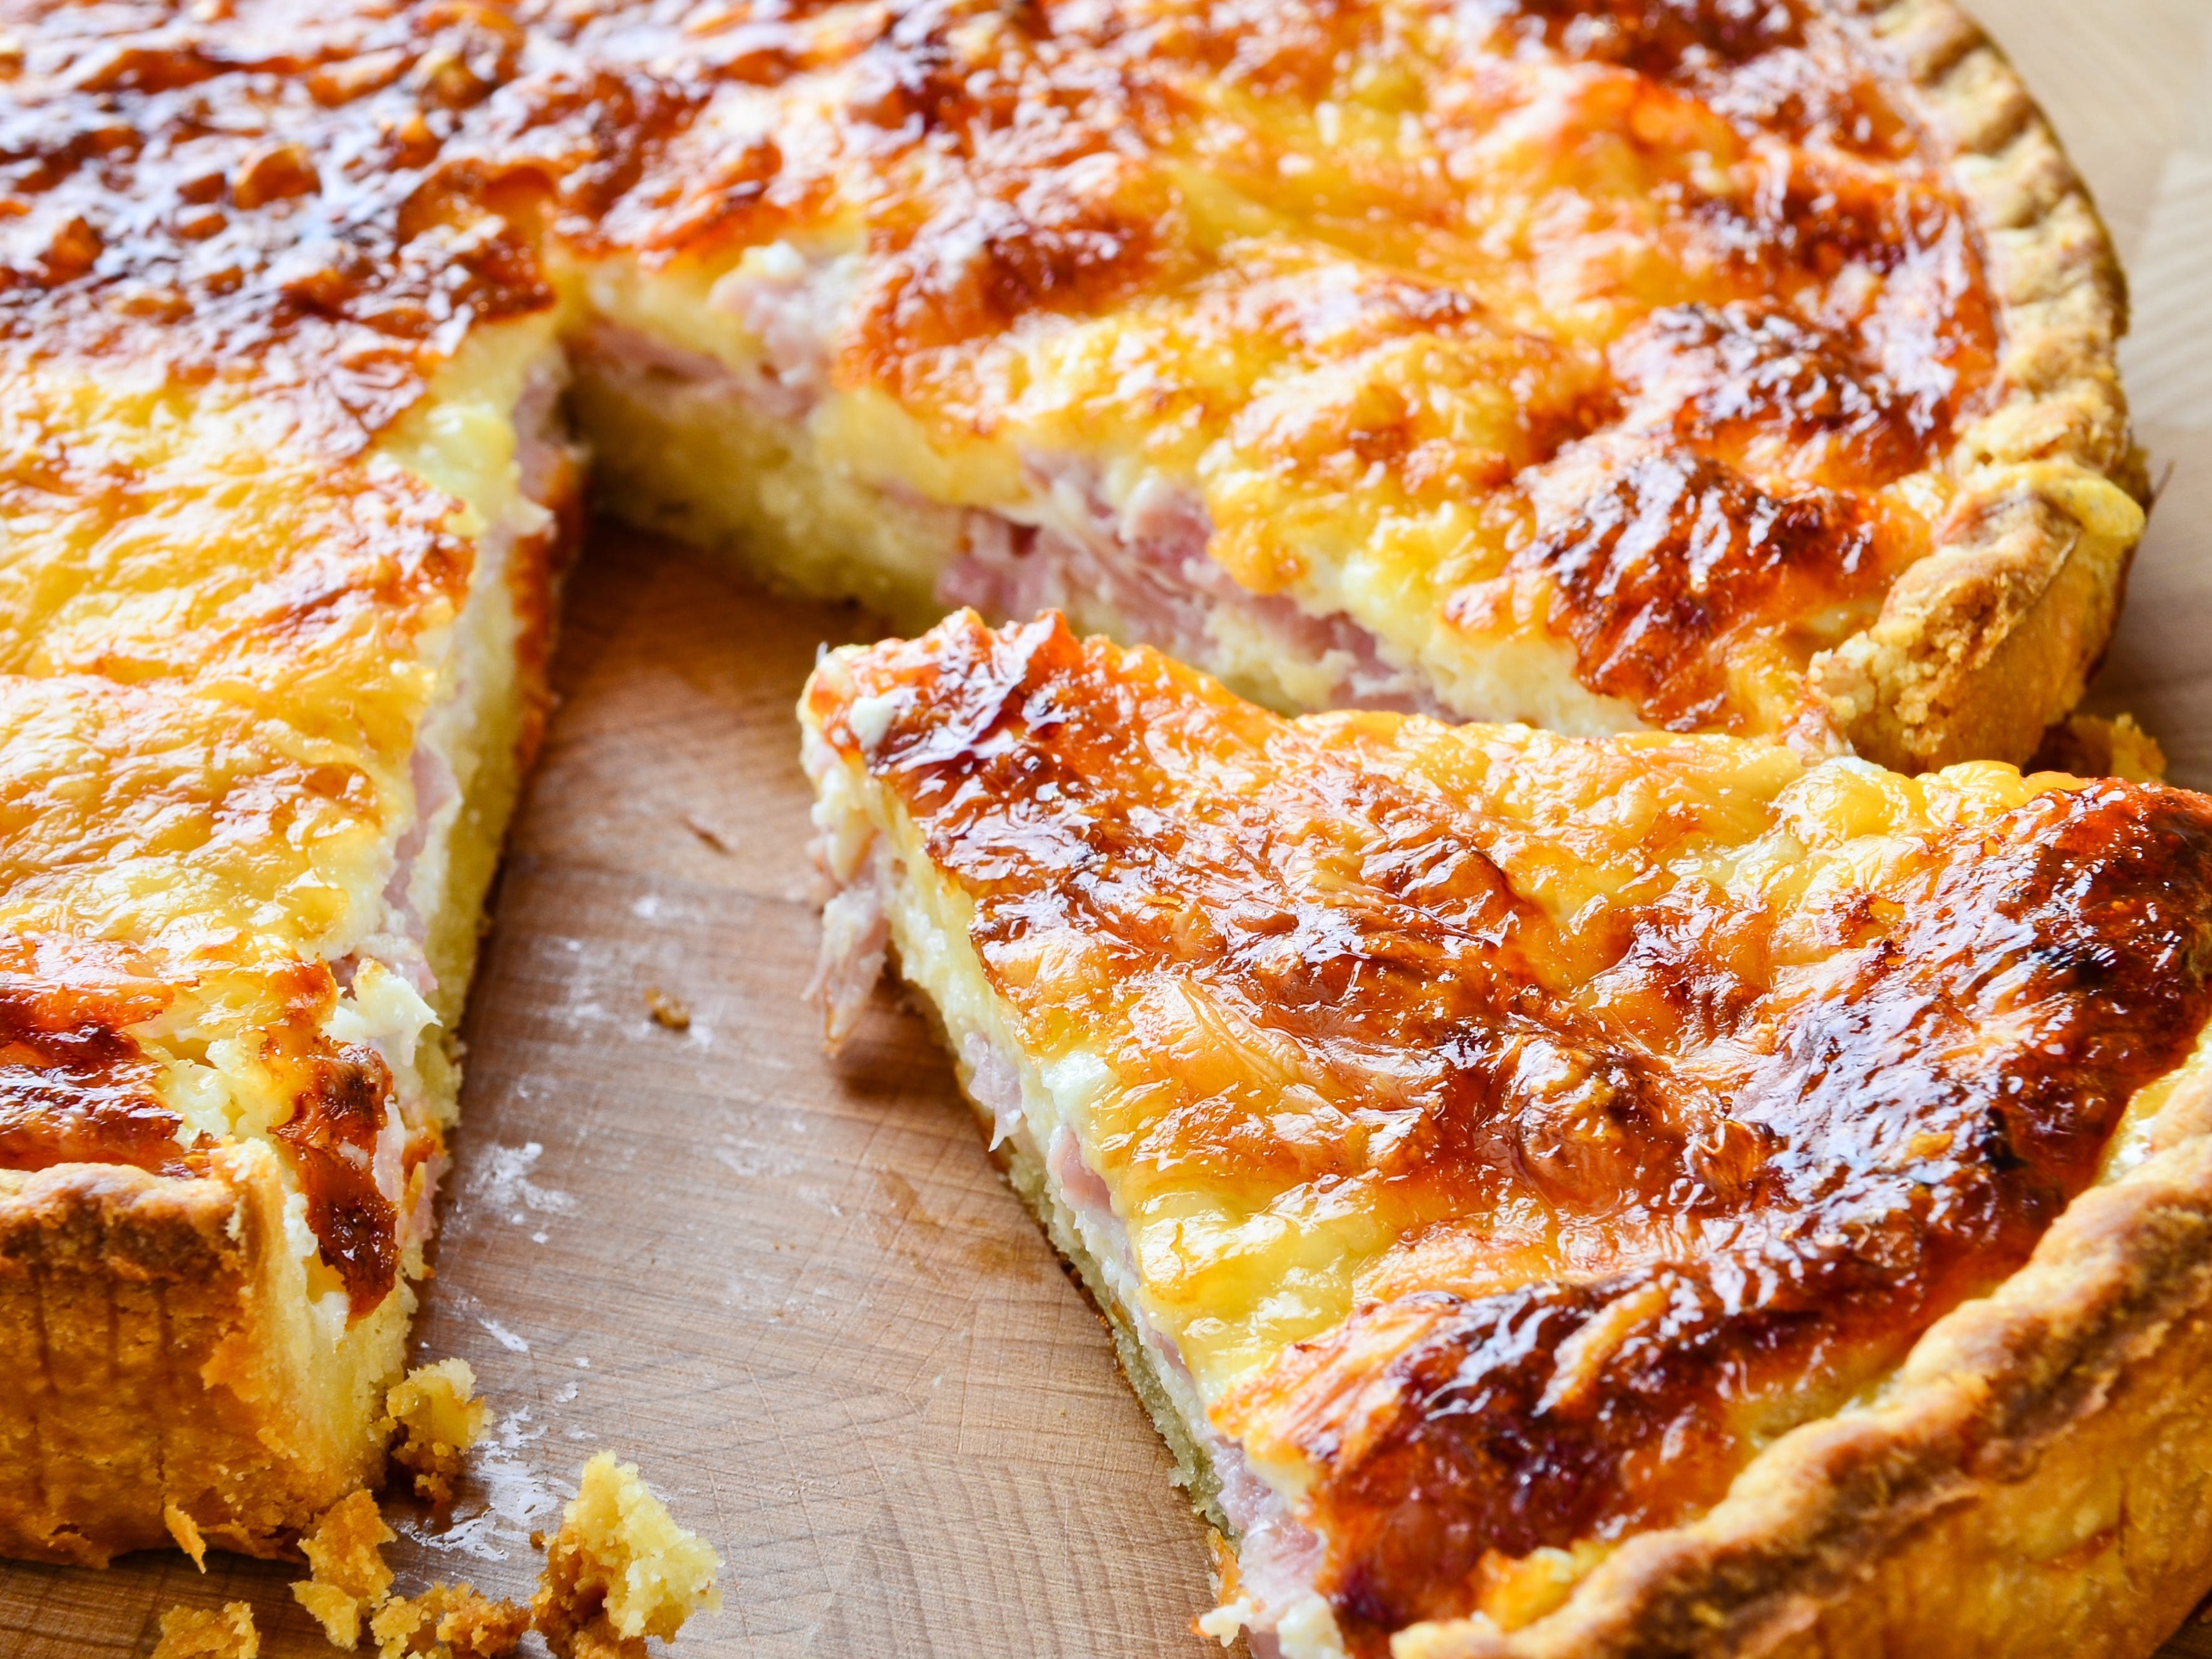 <p>This flaky dish has a rich history. </p><p><a href="https://cooking.nytimes.com/guides/29-how-to-make-quiche">According to the New York Times</a>, quiche Lorraine is named after the historical region in northeastern France that was heavily influenced by Germany, though open-faced tarts were around since medieval times. </p><p>It's usually <a href="https://cooking.nytimes.com/recipes/1019773-quiche-lorraine?searchResultPosition=1">made</a> with <a href="https://www.insider.com/the-best-celebrity-chef-recipe-for-well-done-steak-2021-9">mashed butter</a> mixed with eggs worked into a flat disc of dough. After it's baked, it's covered in grated Gruyère, nutmeg-filled custard, and cooked pancetta. </p>